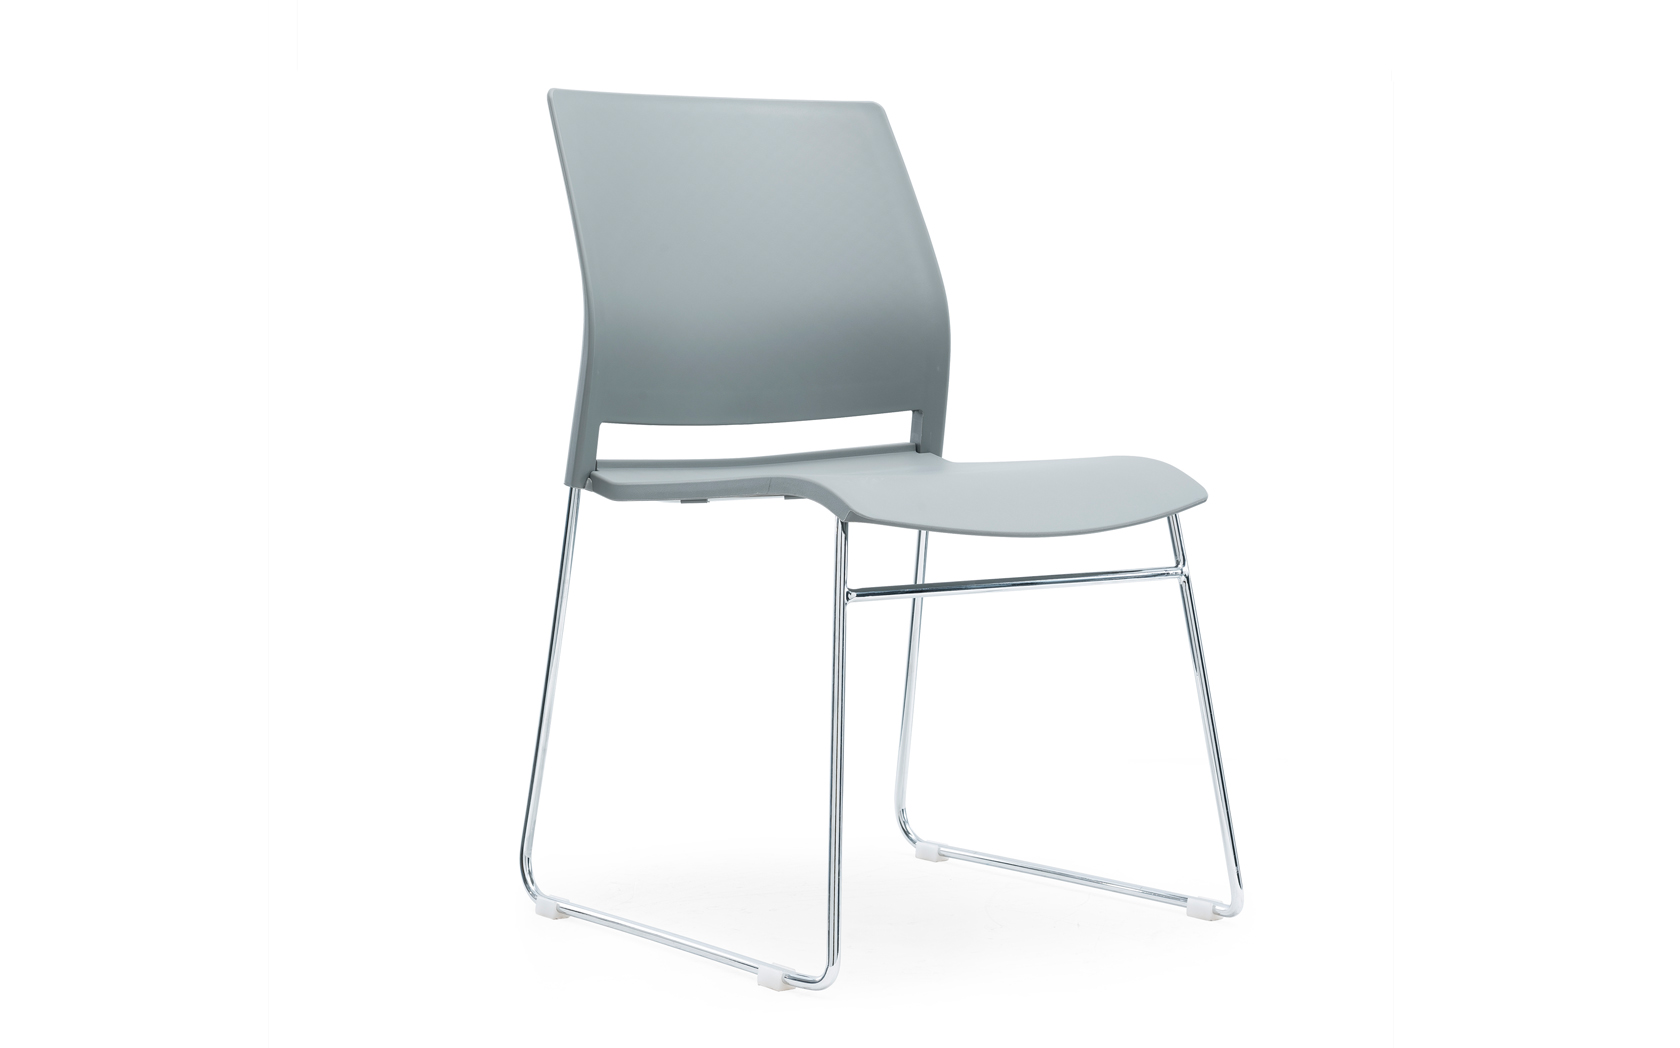 Multi purpose skid frame chair plastic seat and back stacks 10 high grey